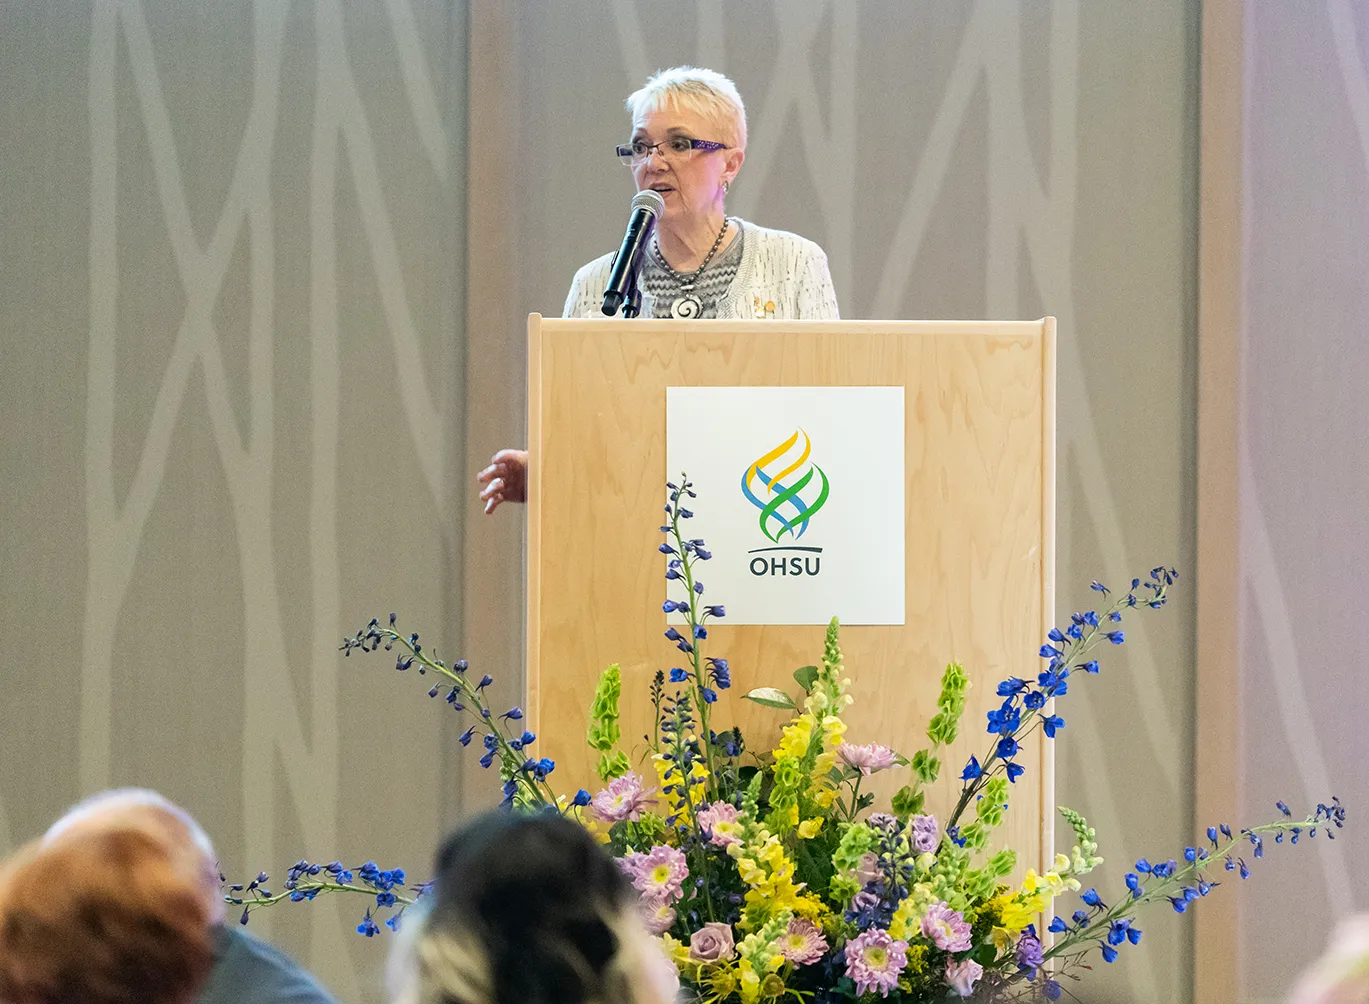 A women speaking at a podium with the OHSU logo on it and a large floral arrangement.